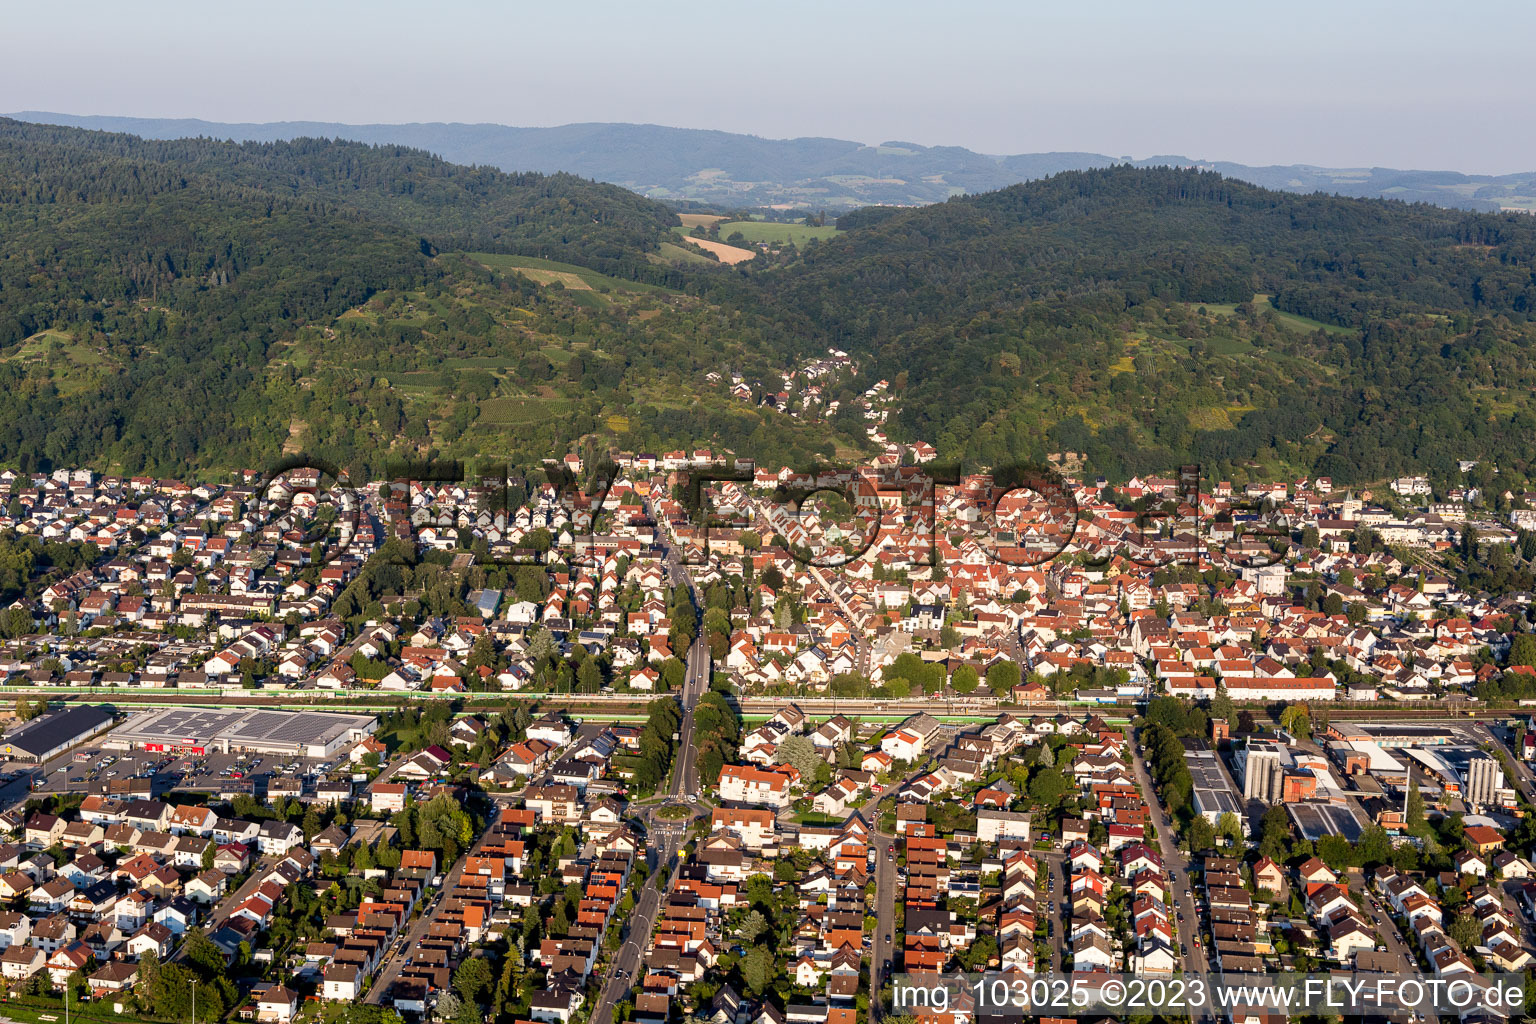 Hemsbach in the state Baden-Wuerttemberg, Germany from the drone perspective